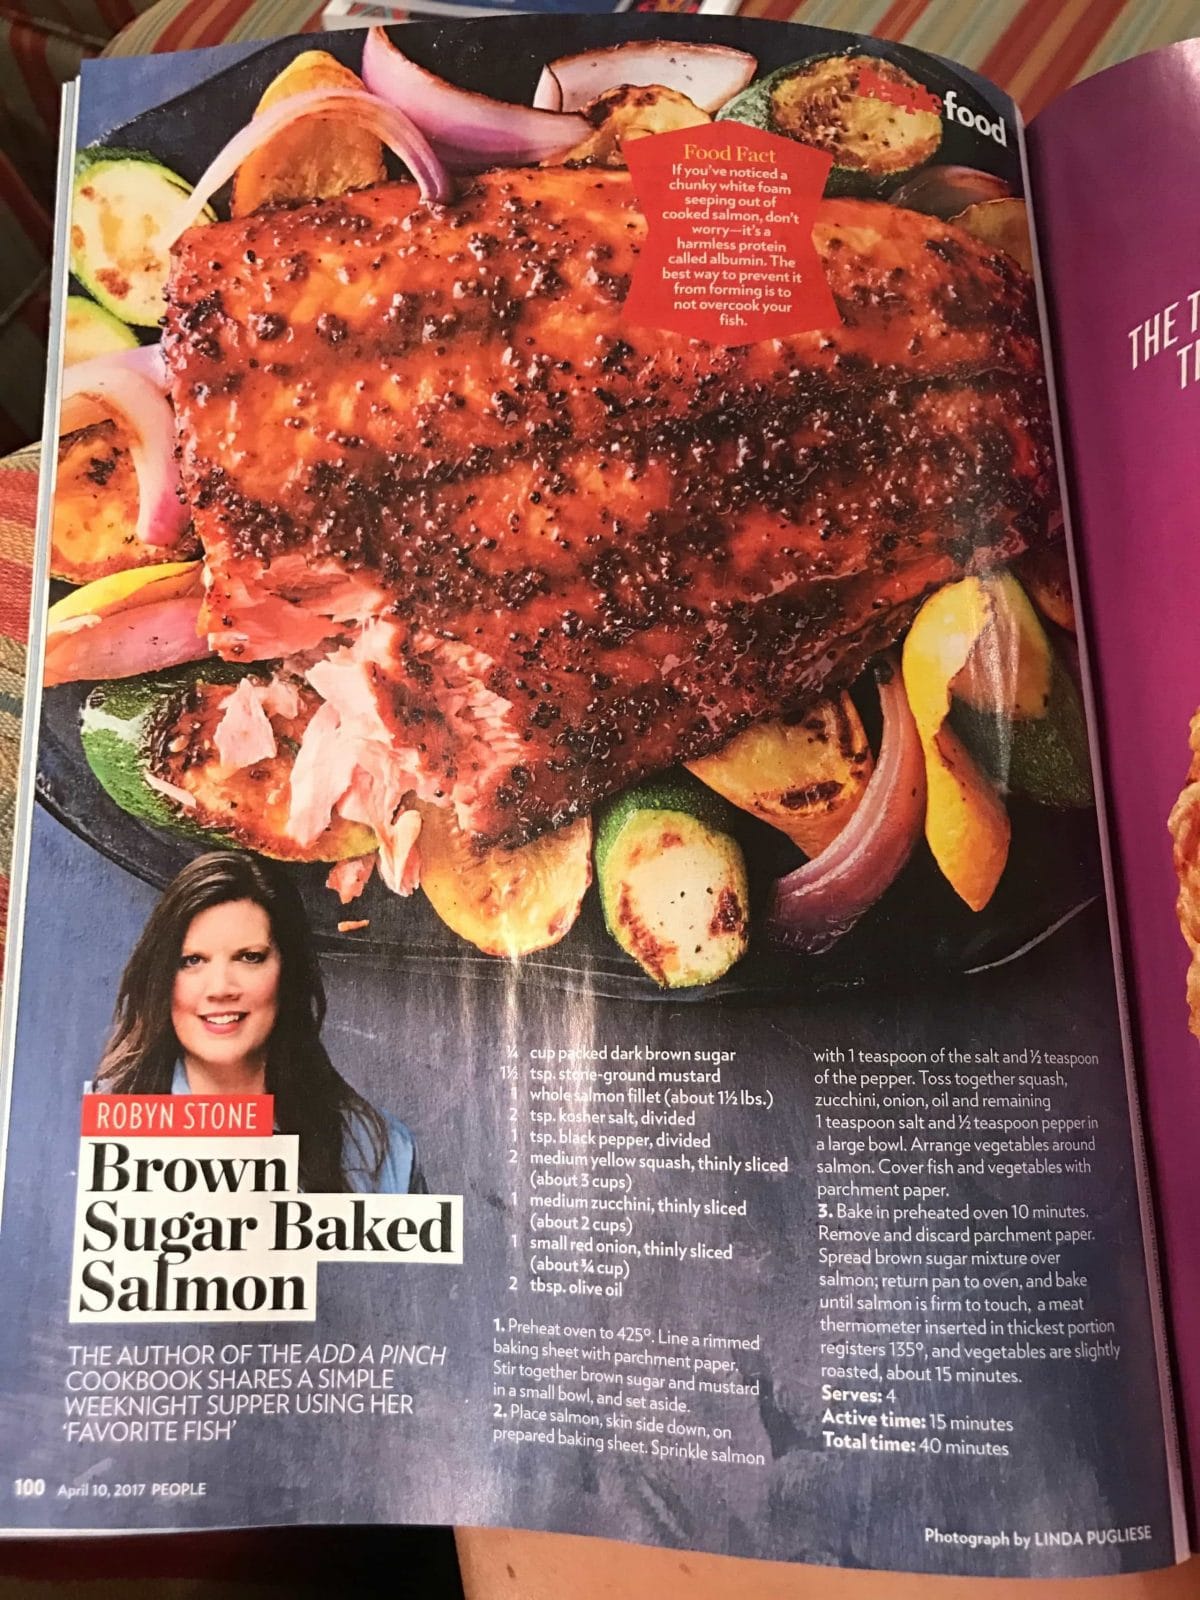 Image from People Magazine showing Add a Pinch Cookbook recipe feature.